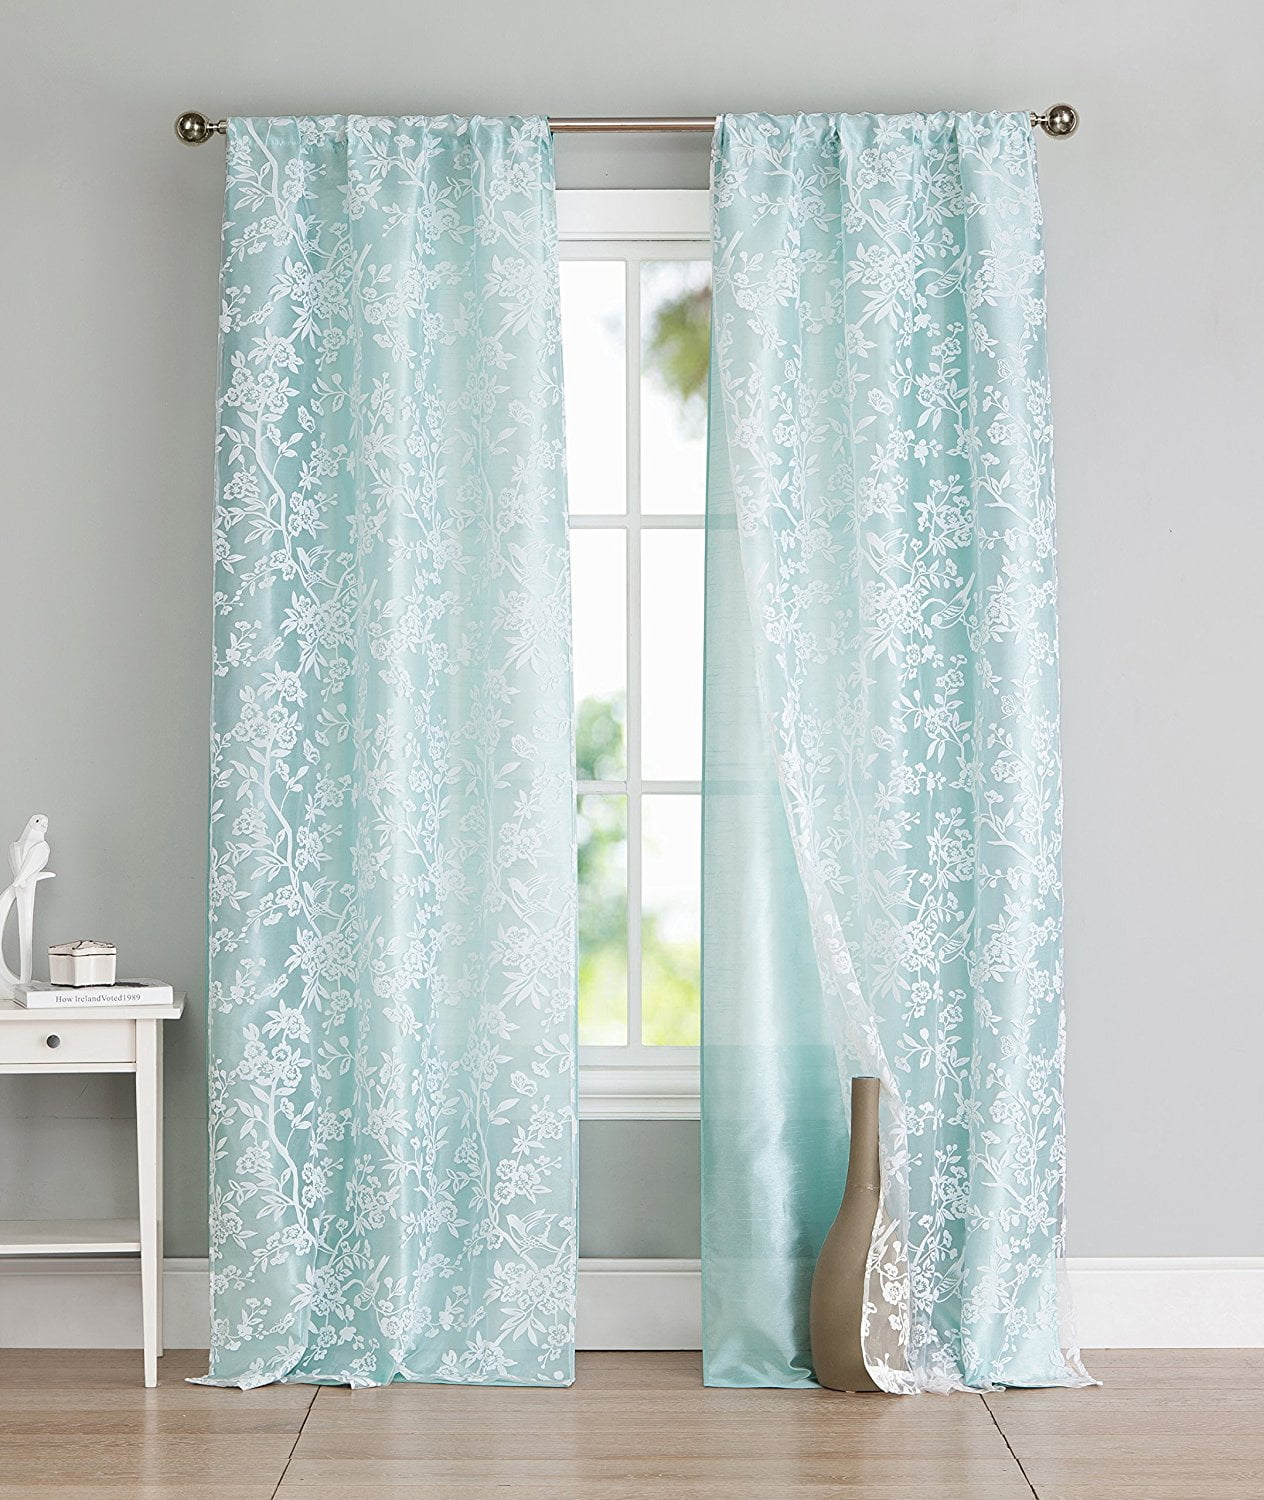 Set of Two (2) Spa Blue and White Cotton Blend Window Curtain Panels Bird and Tree Branch